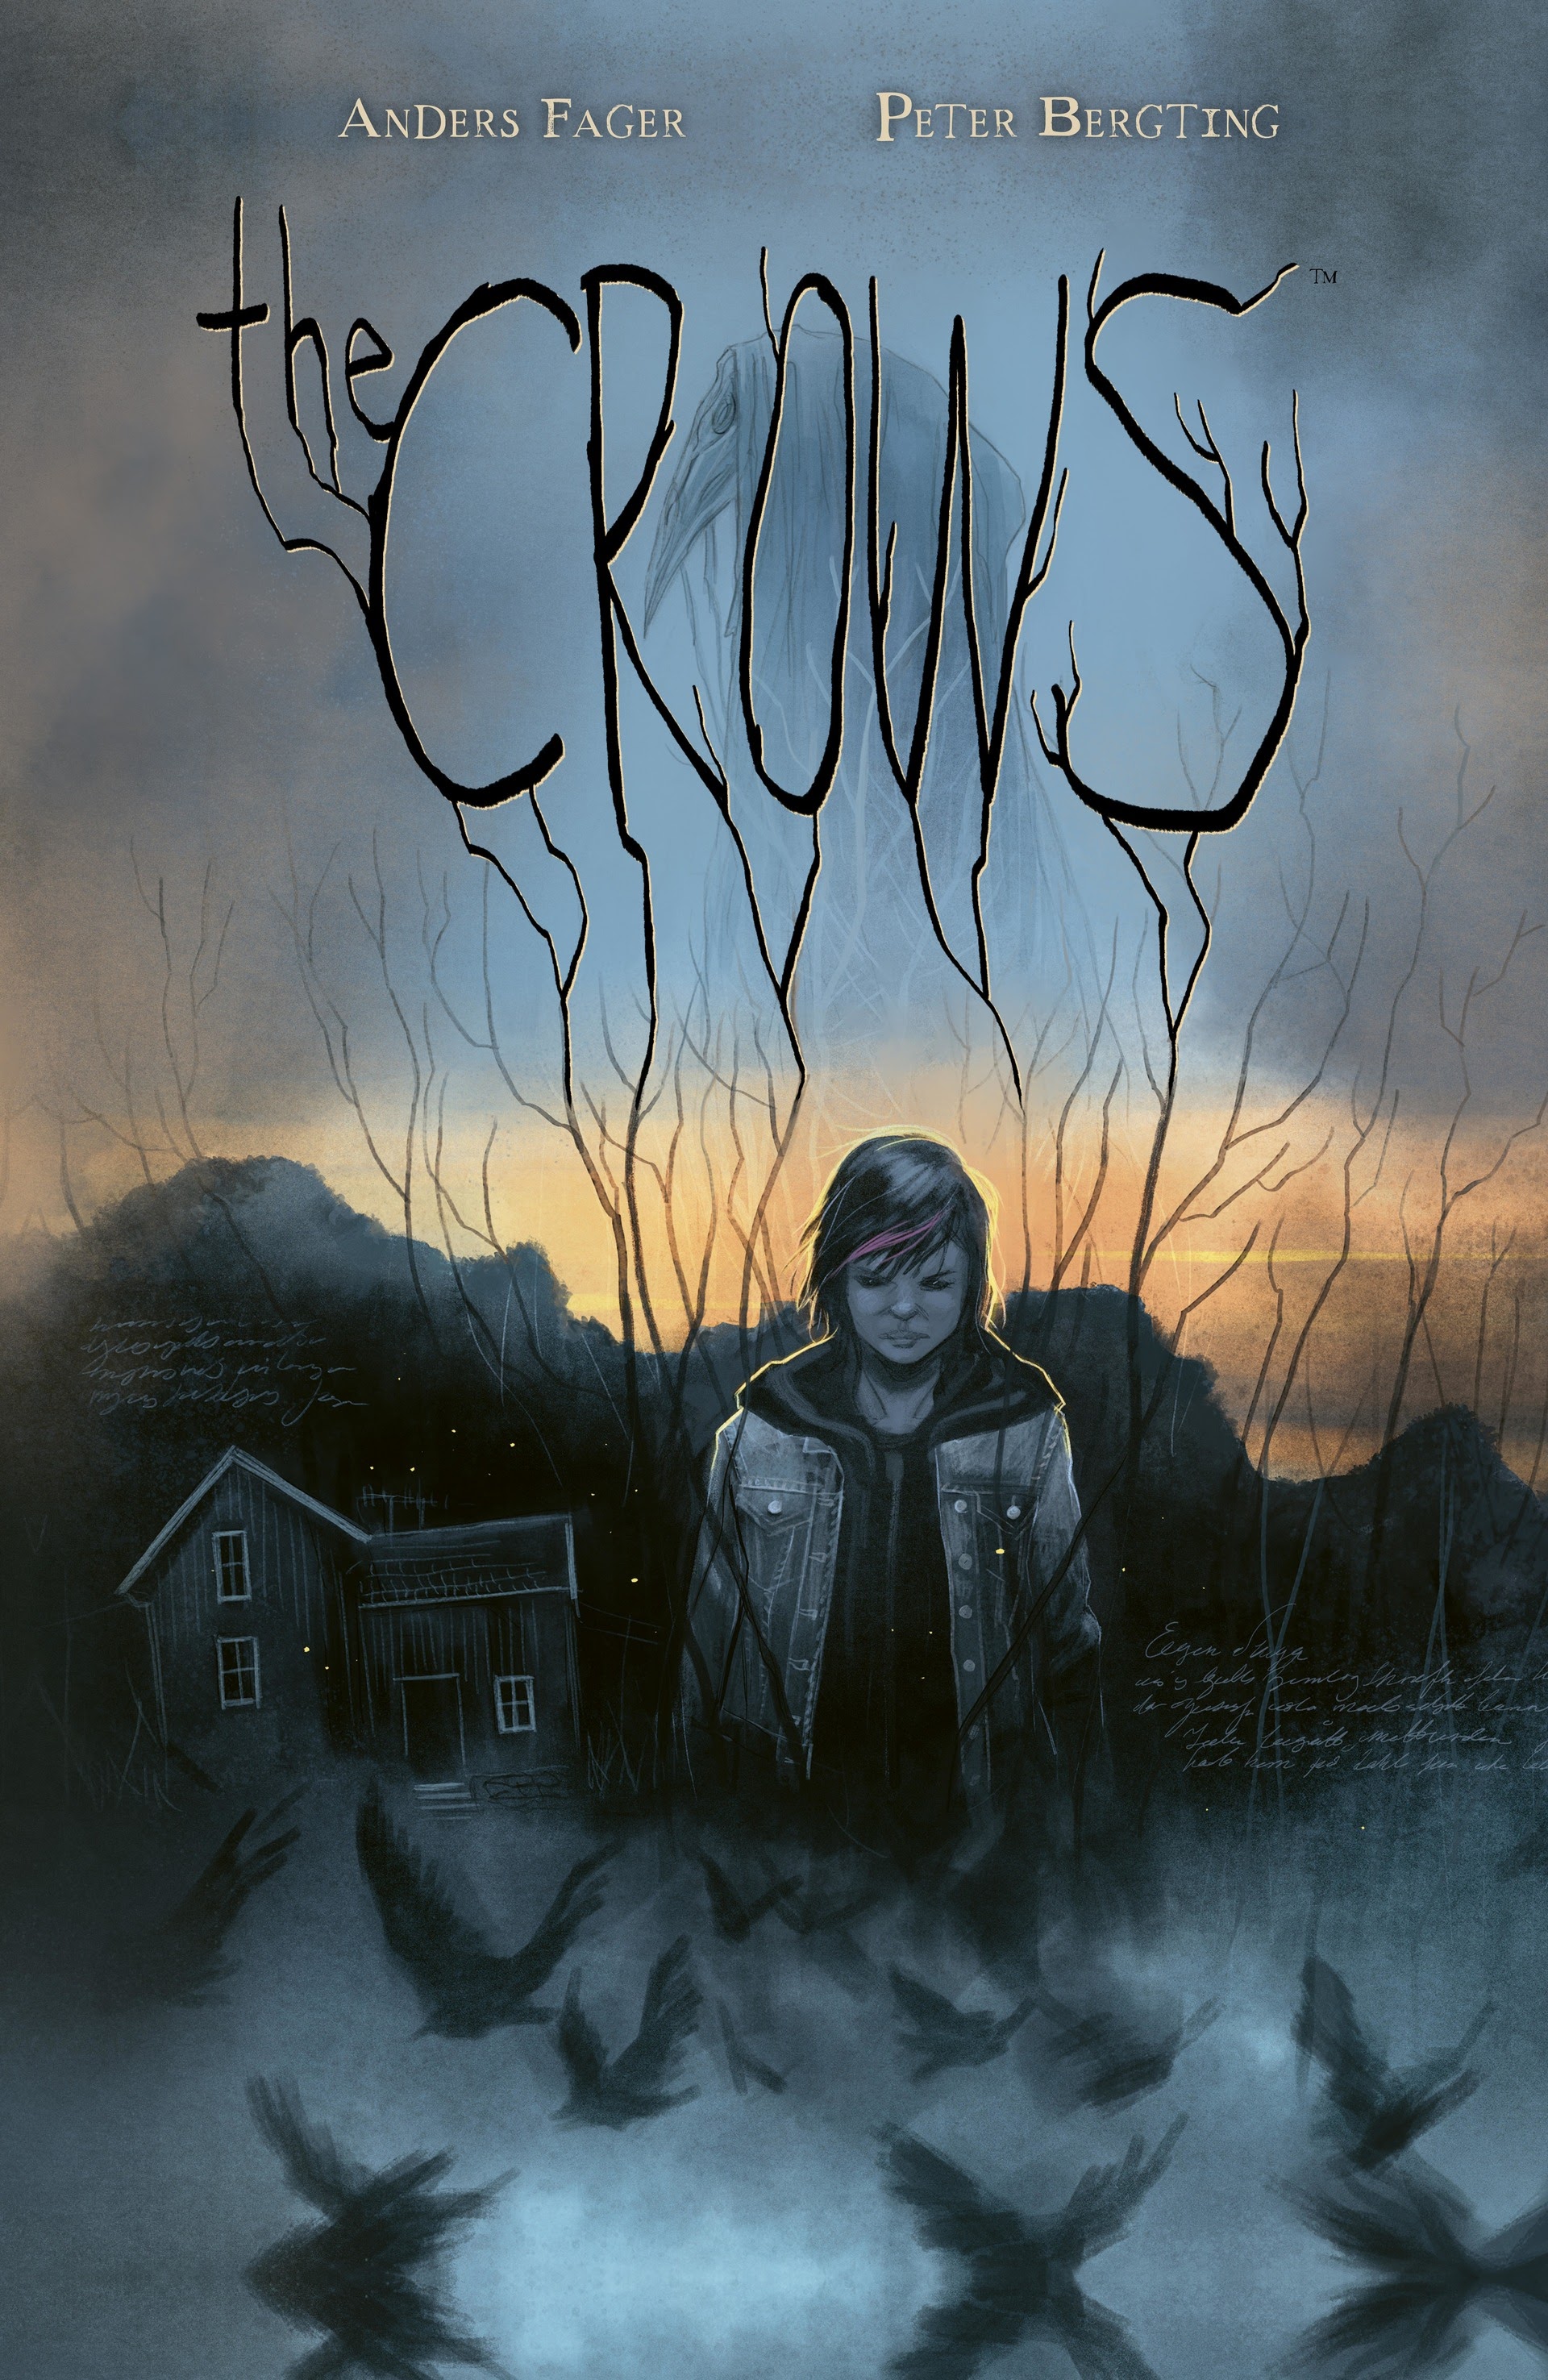 Read online The Crows comic -  Issue # TPB - 1